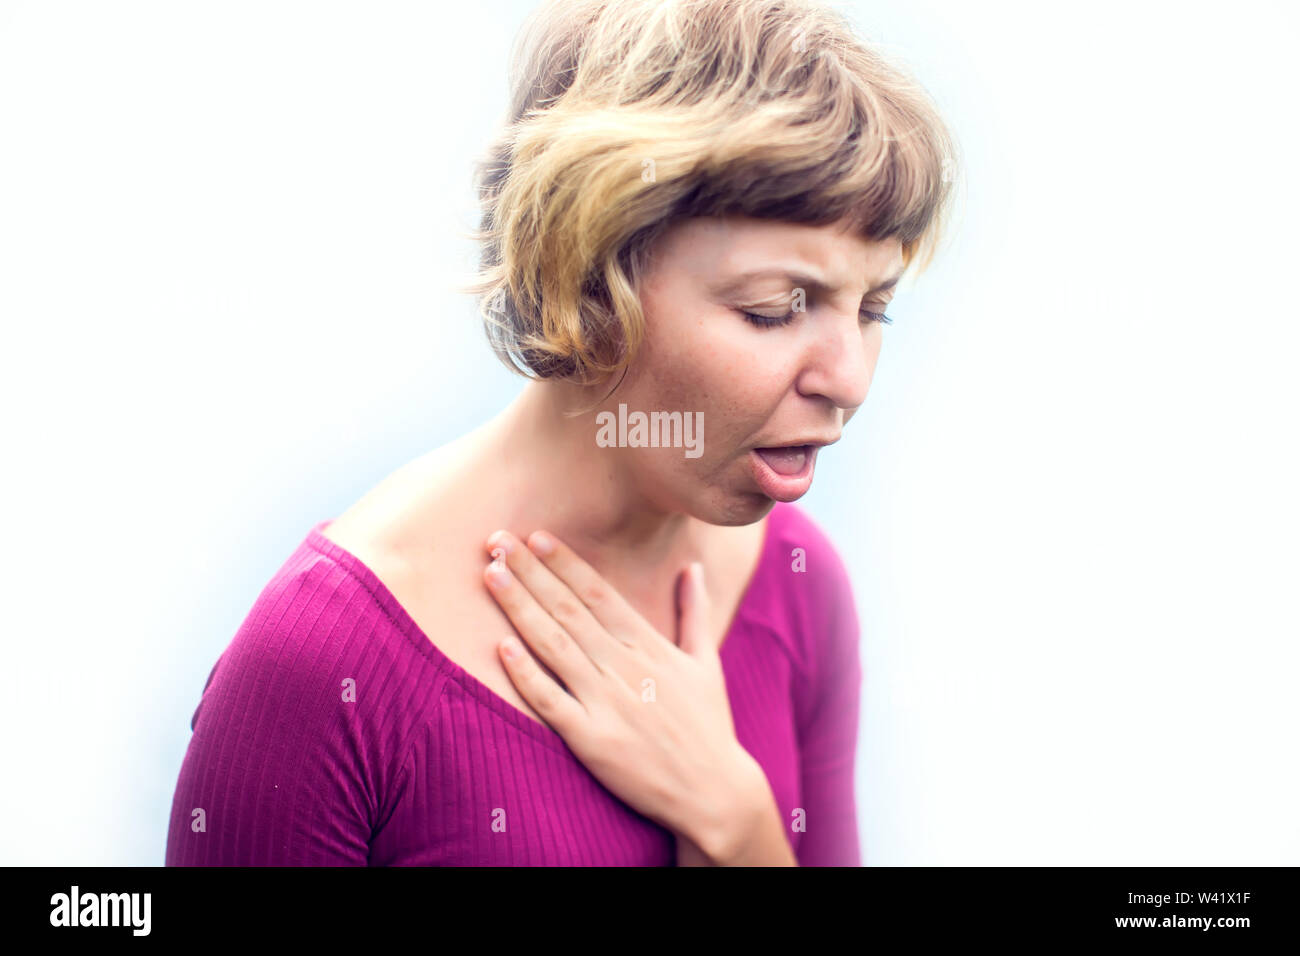 Throat Pain. Ill Woman Suffering From Painful Swallowing, Touching Neck With Hand. Female Caught Cold. Healthcare, people and medicine Concept. Stock Photo